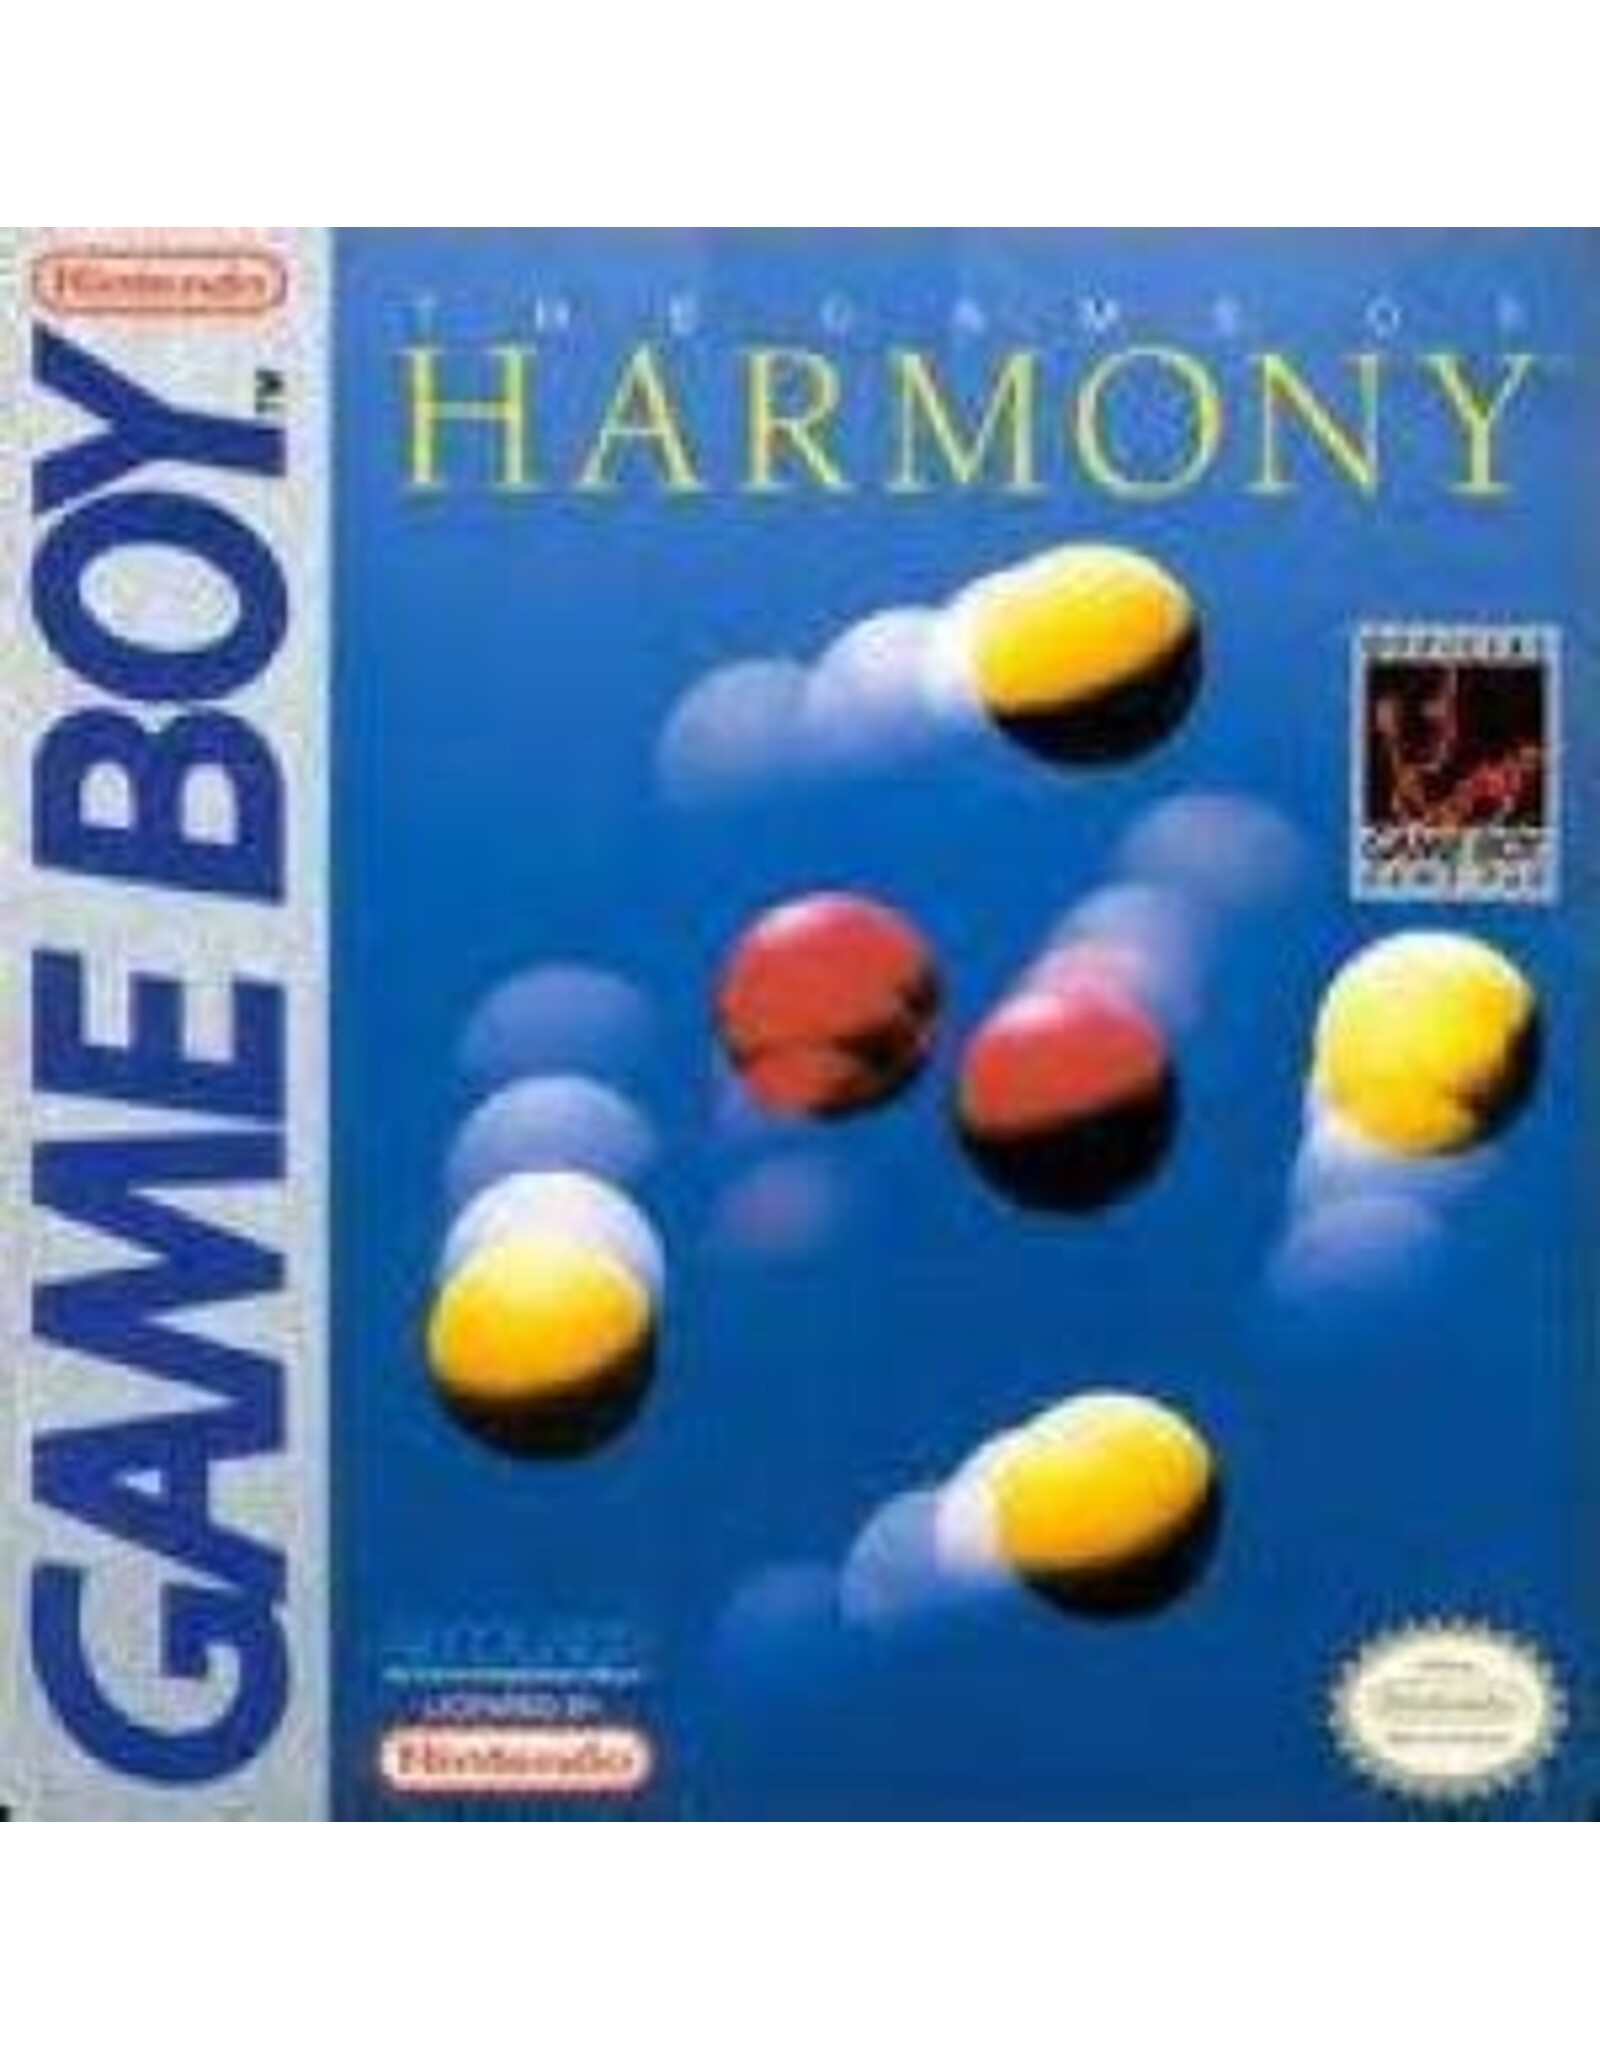 Game Boy Game of Harmony (Cart Only)